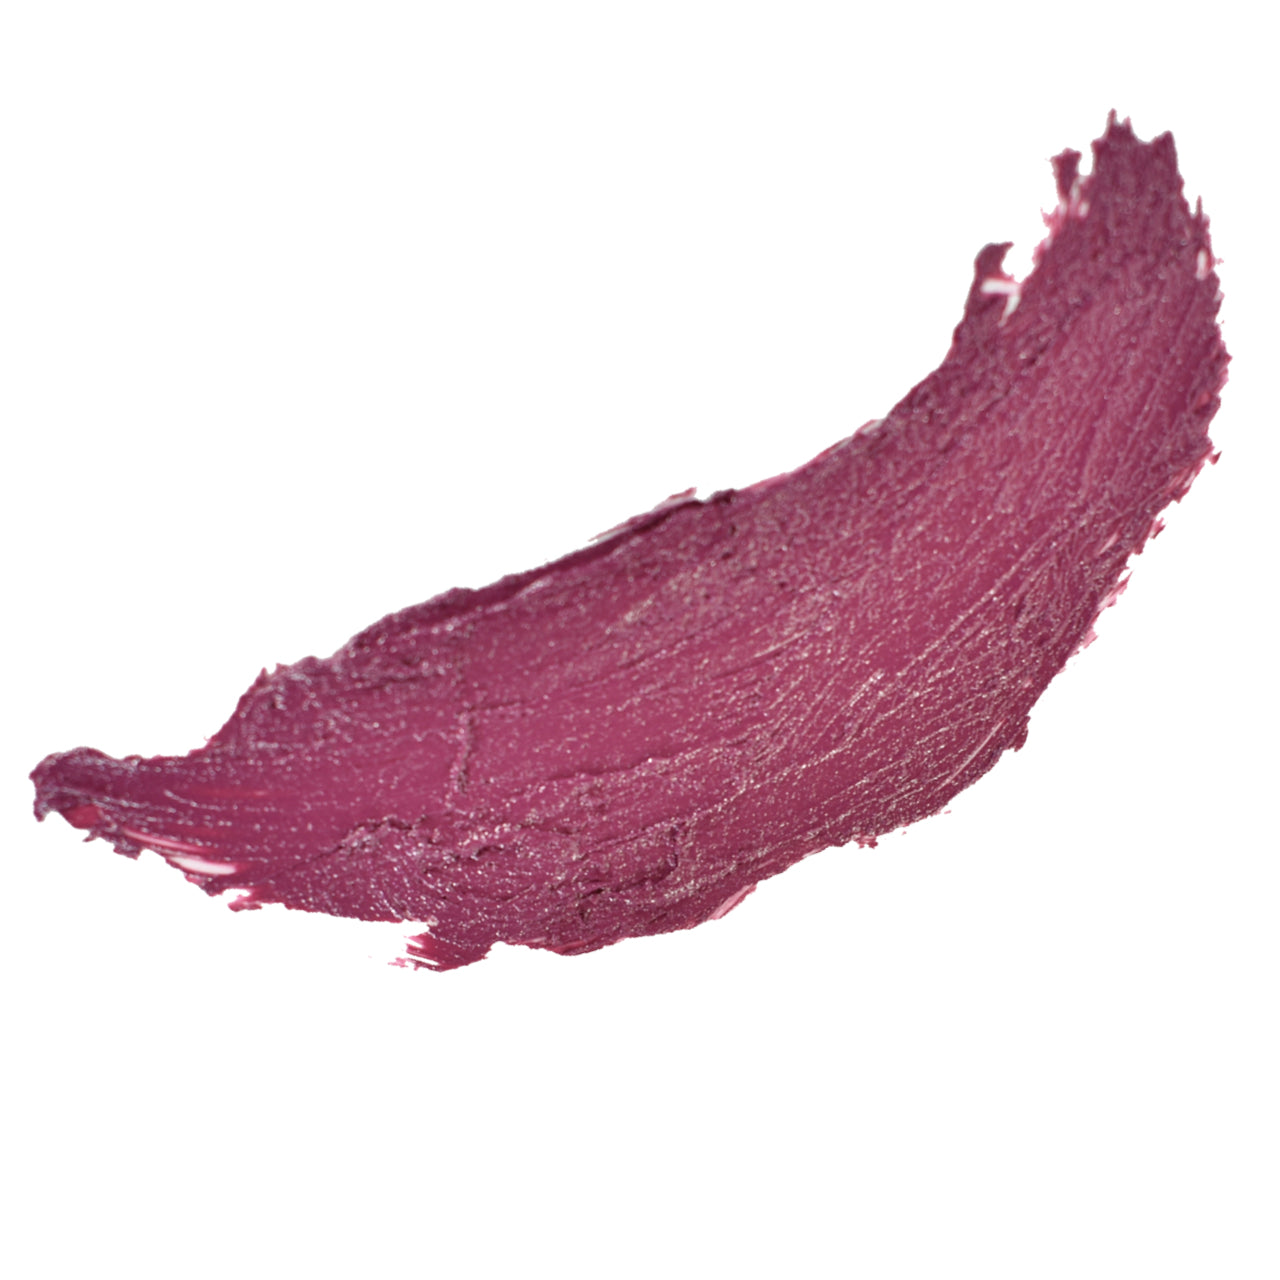 Rhumba swatch deep purple plumb with pink undertone perfect for cool colour pallet swatch on white background